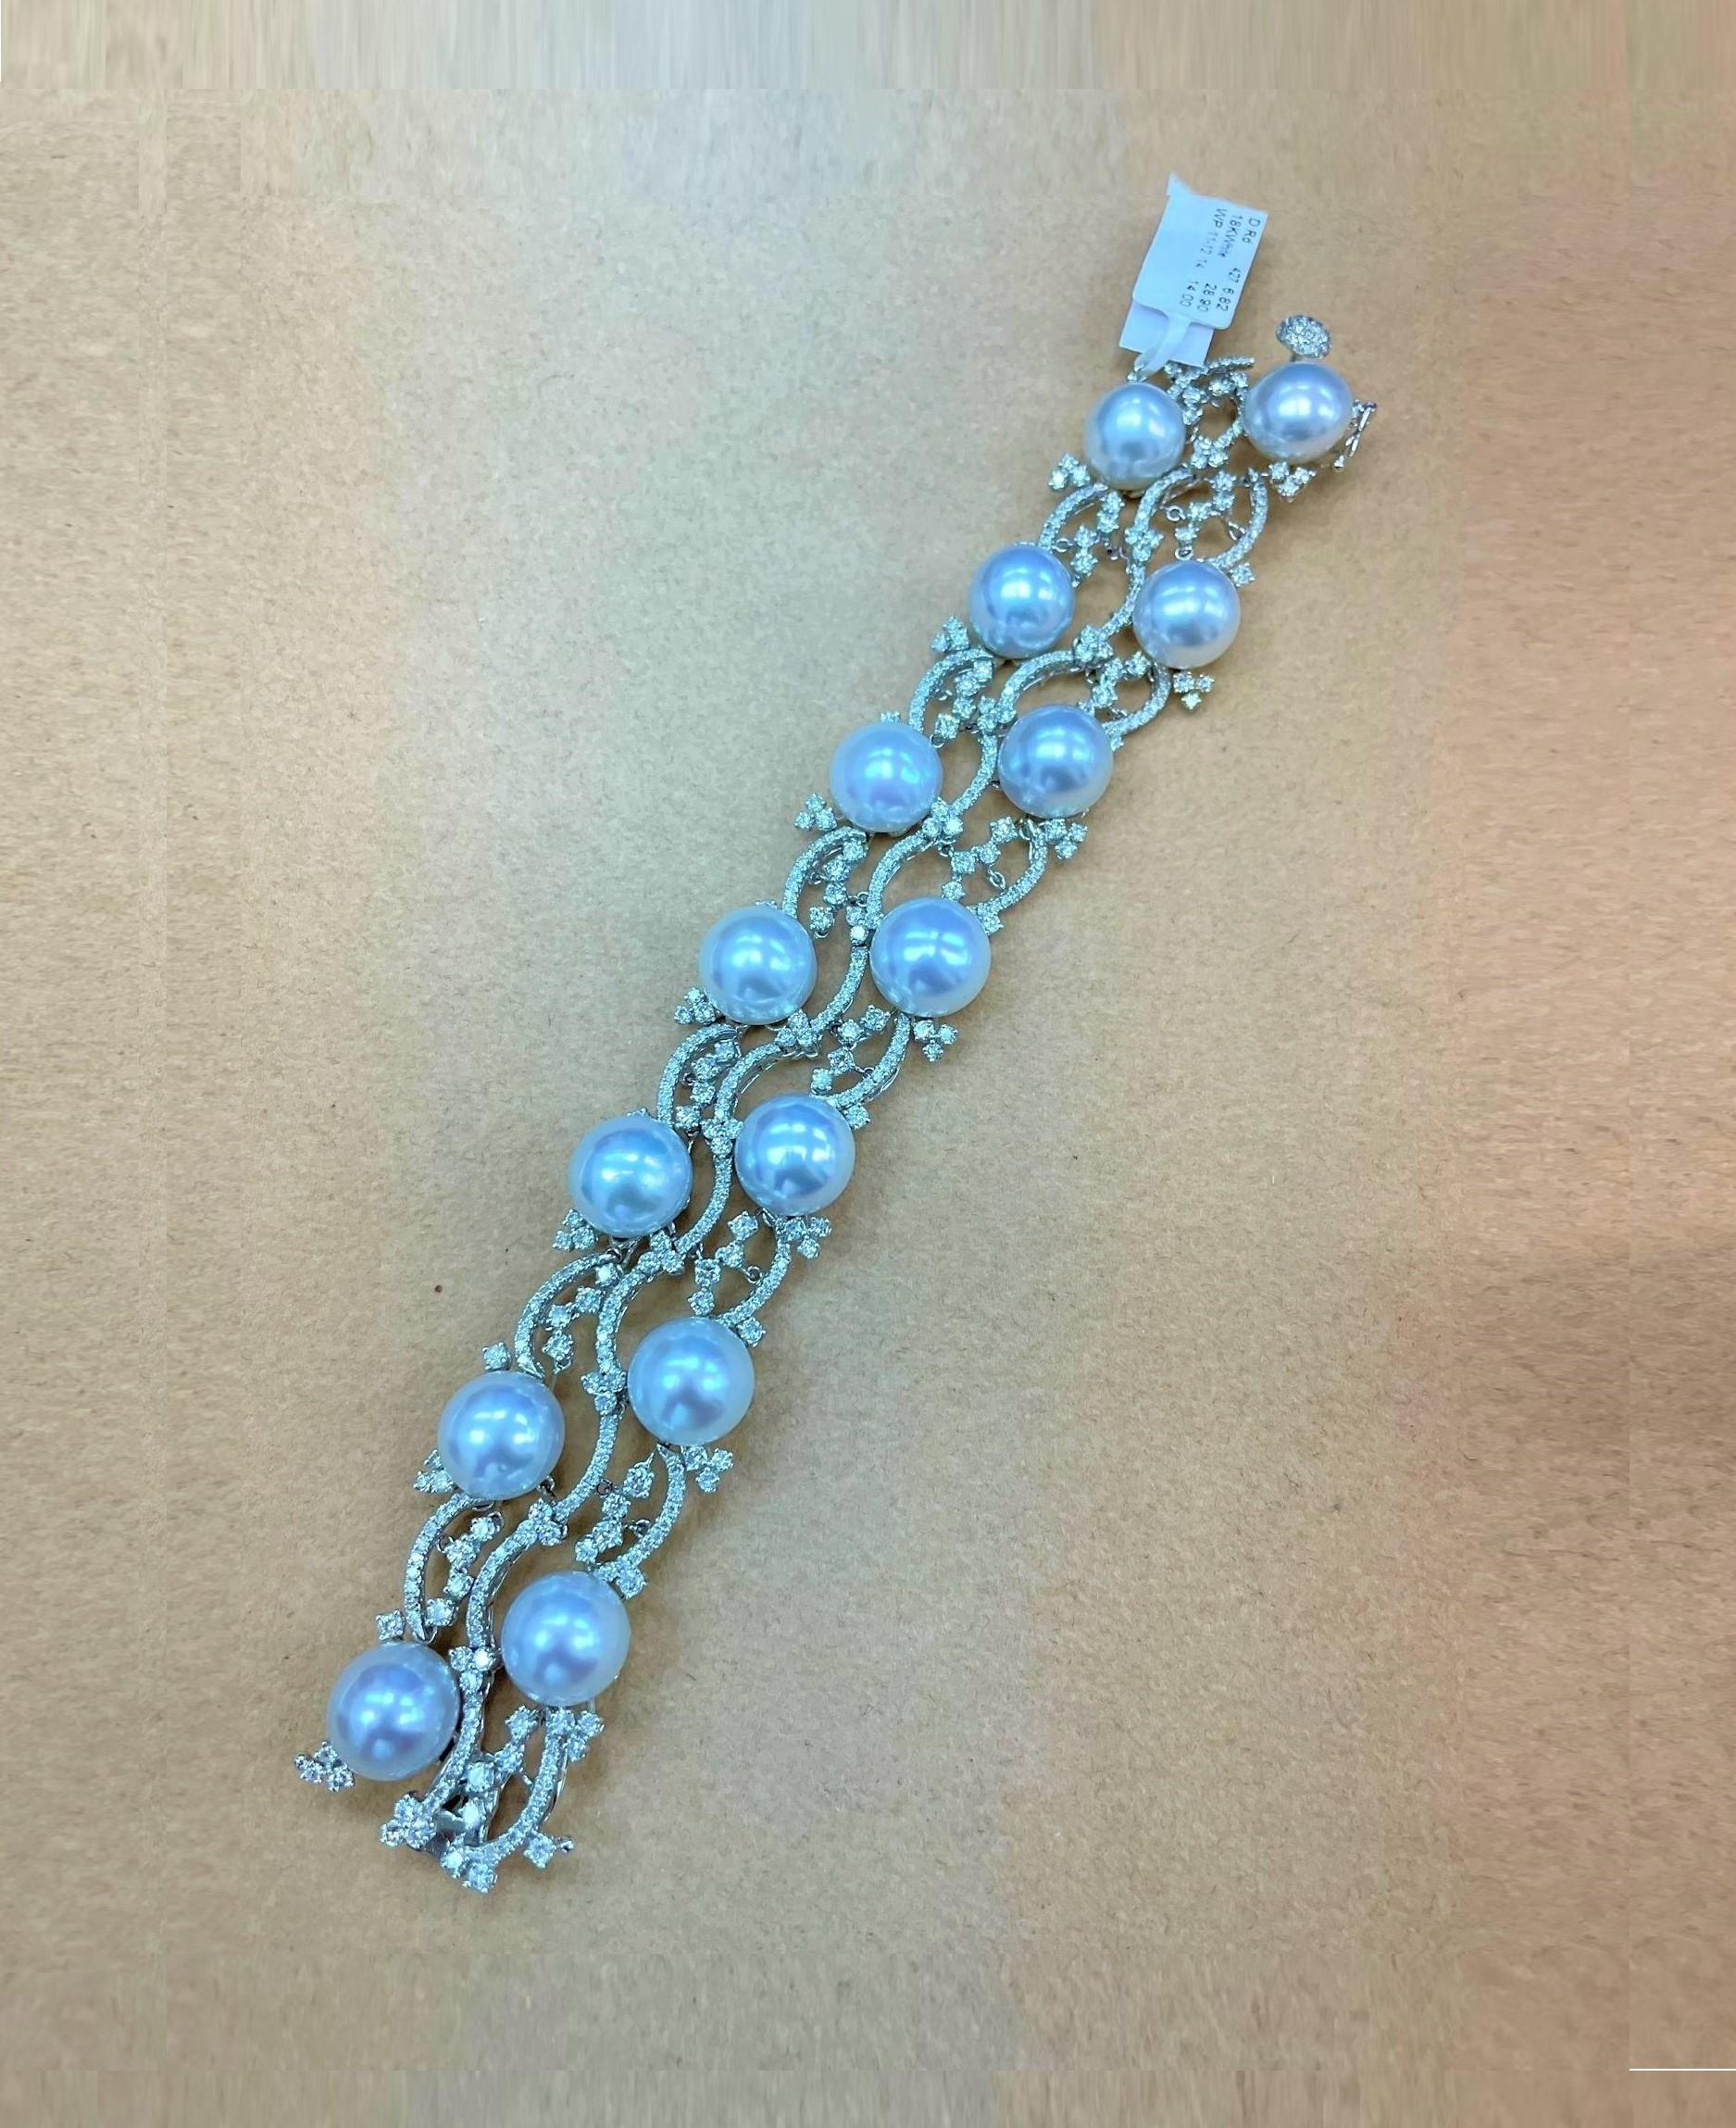 The Following Item we are offering is this Beautiful Rare Important 18KT White Gold Pearl and Diamond Bracelet. Bracelet is comprised of Beautiful Magnificent High Luster Large 14 AA-AAA SOUTH SEA PEARLS that give off a Radiant Hue!!! Beautifully